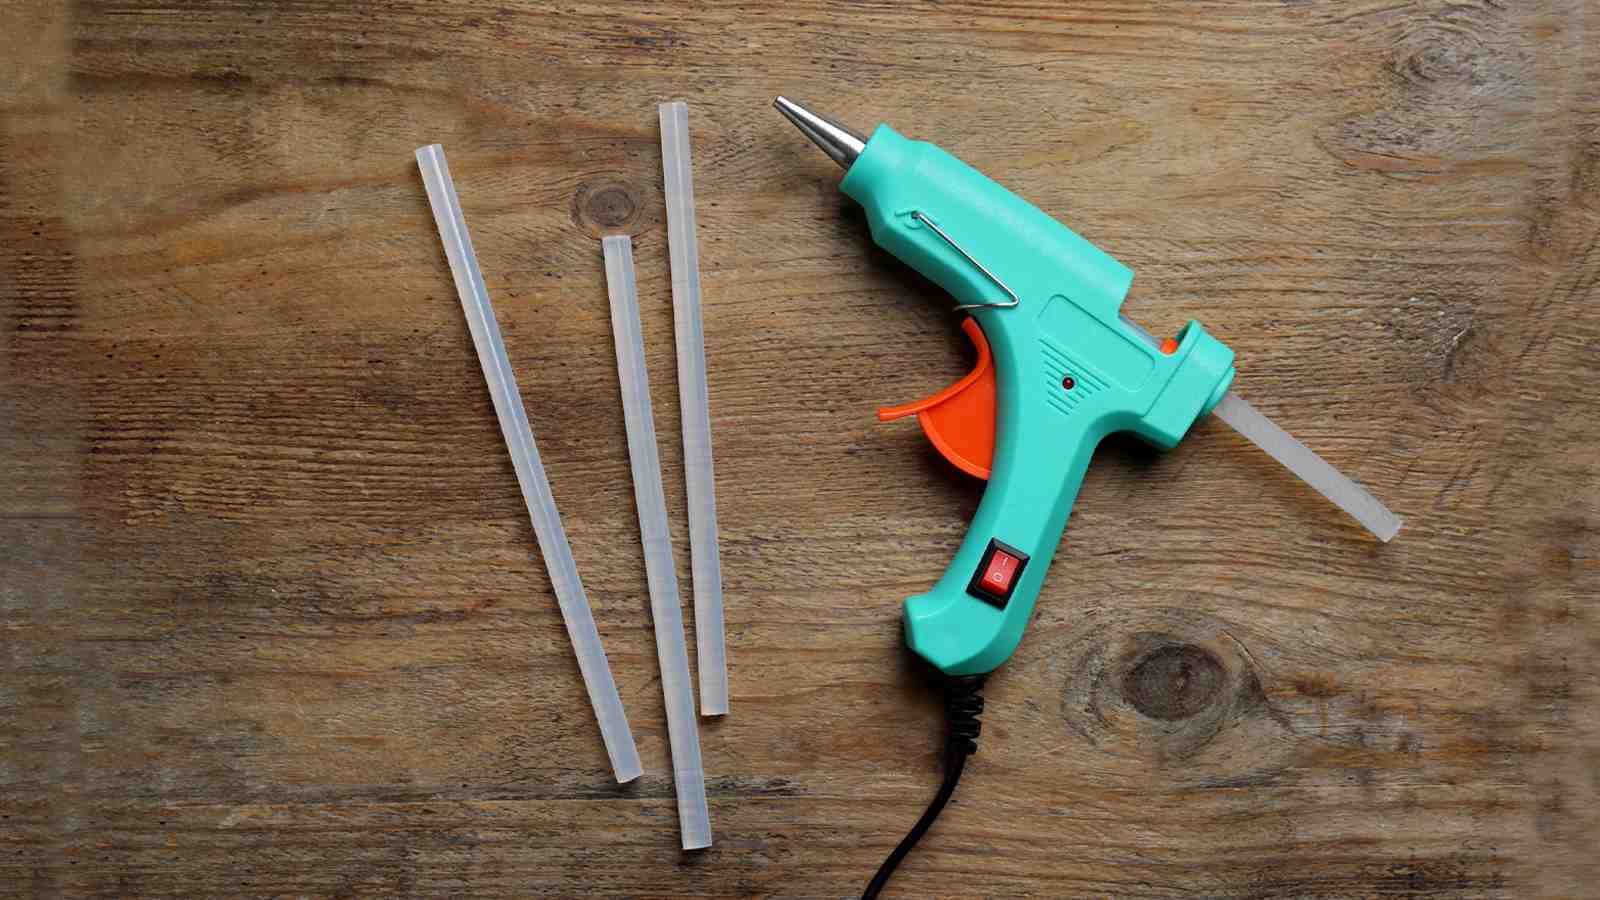 A glue gun with plastic sticks on a wooden table.